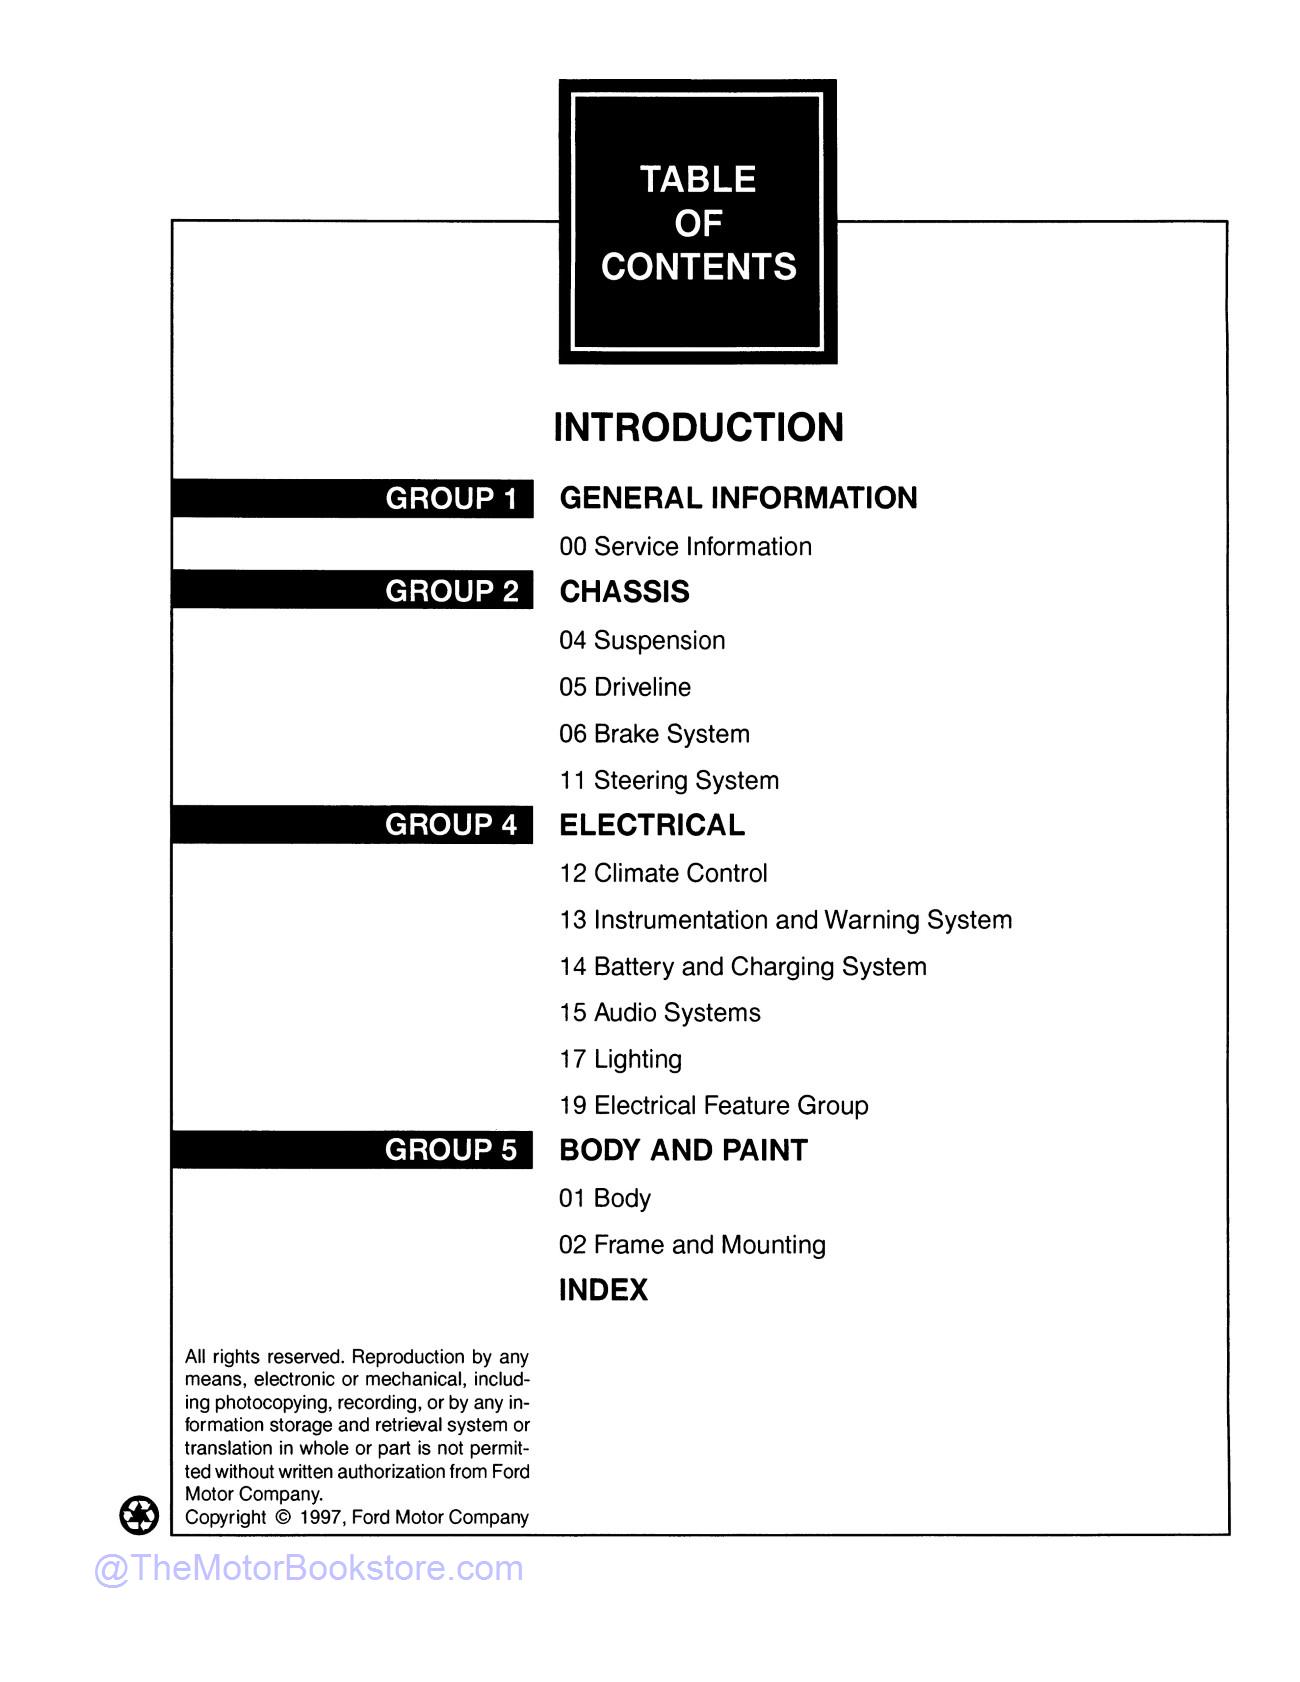 1998 Ford F-150, F-250 Truck Workshop Manual  - Table of Contents 1